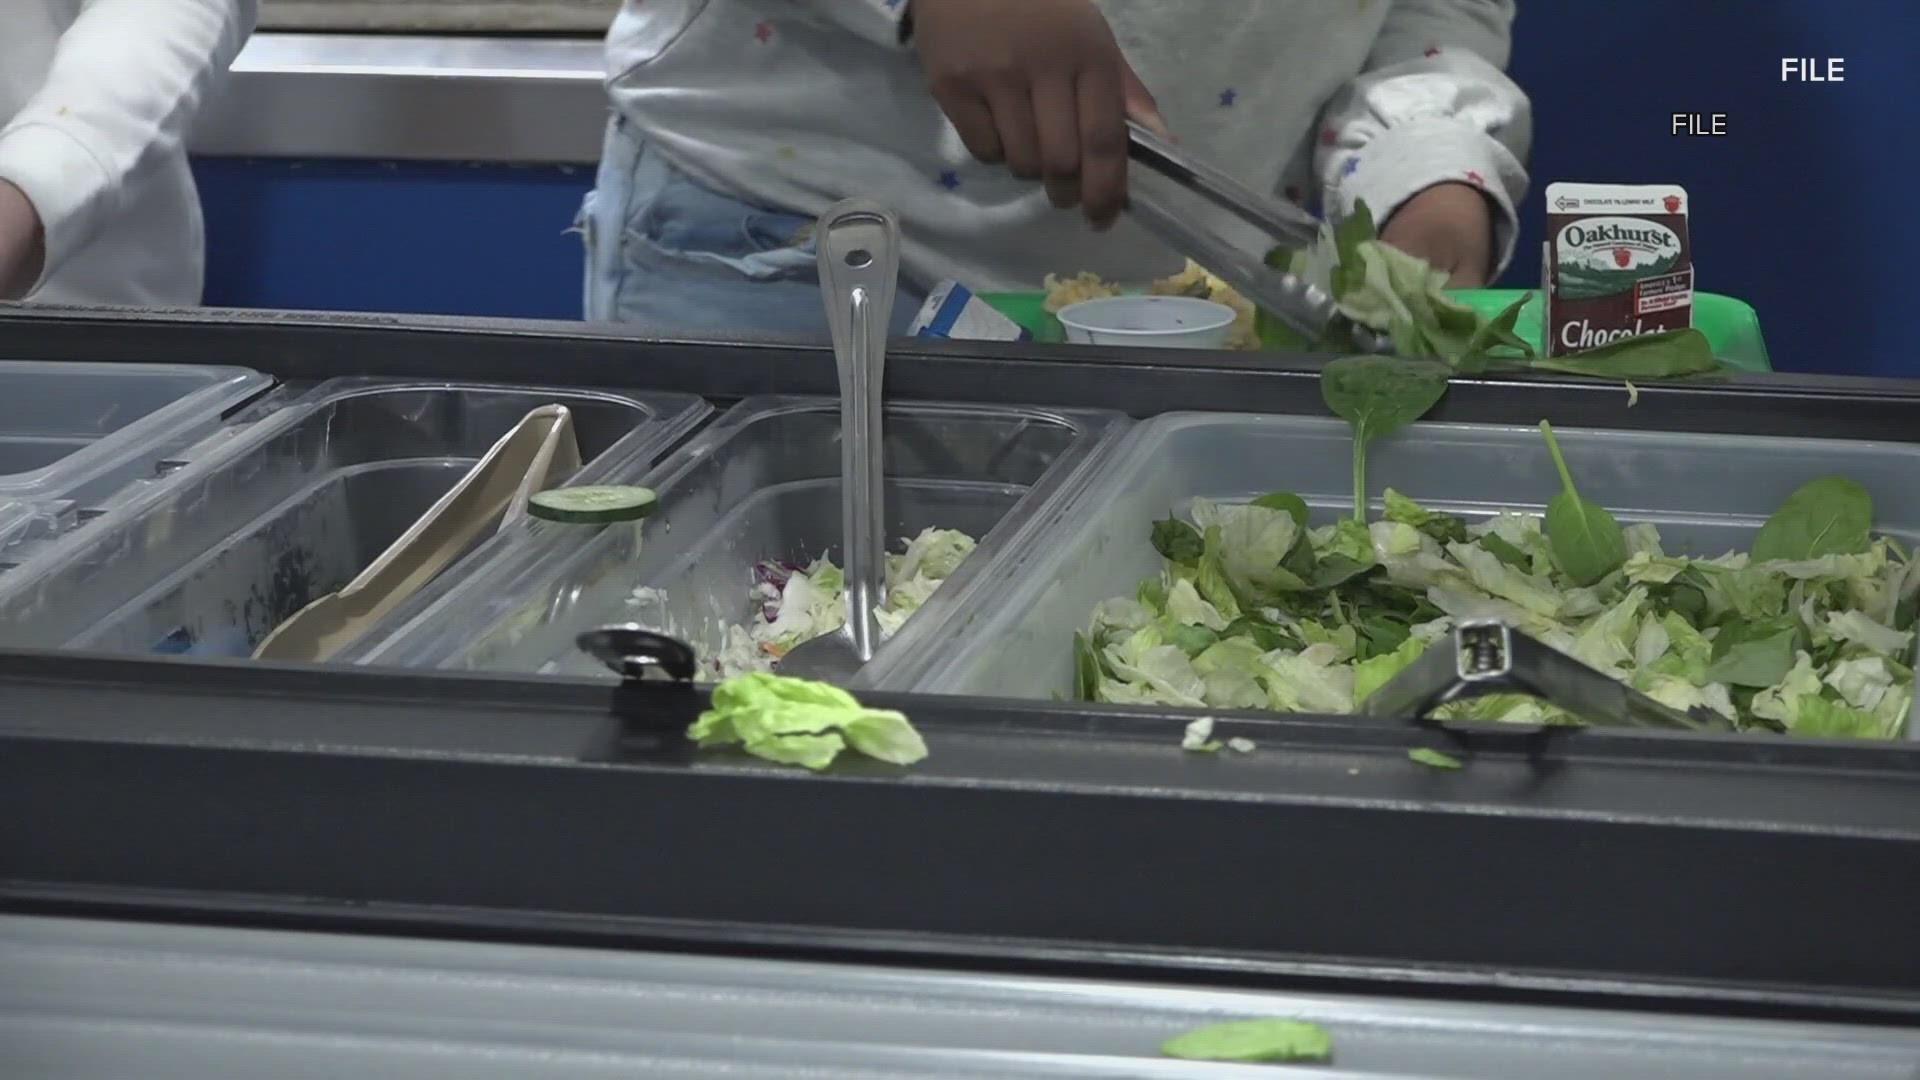 With free meals available for all students in Maine, officials say there  are still hurdles to offering better food